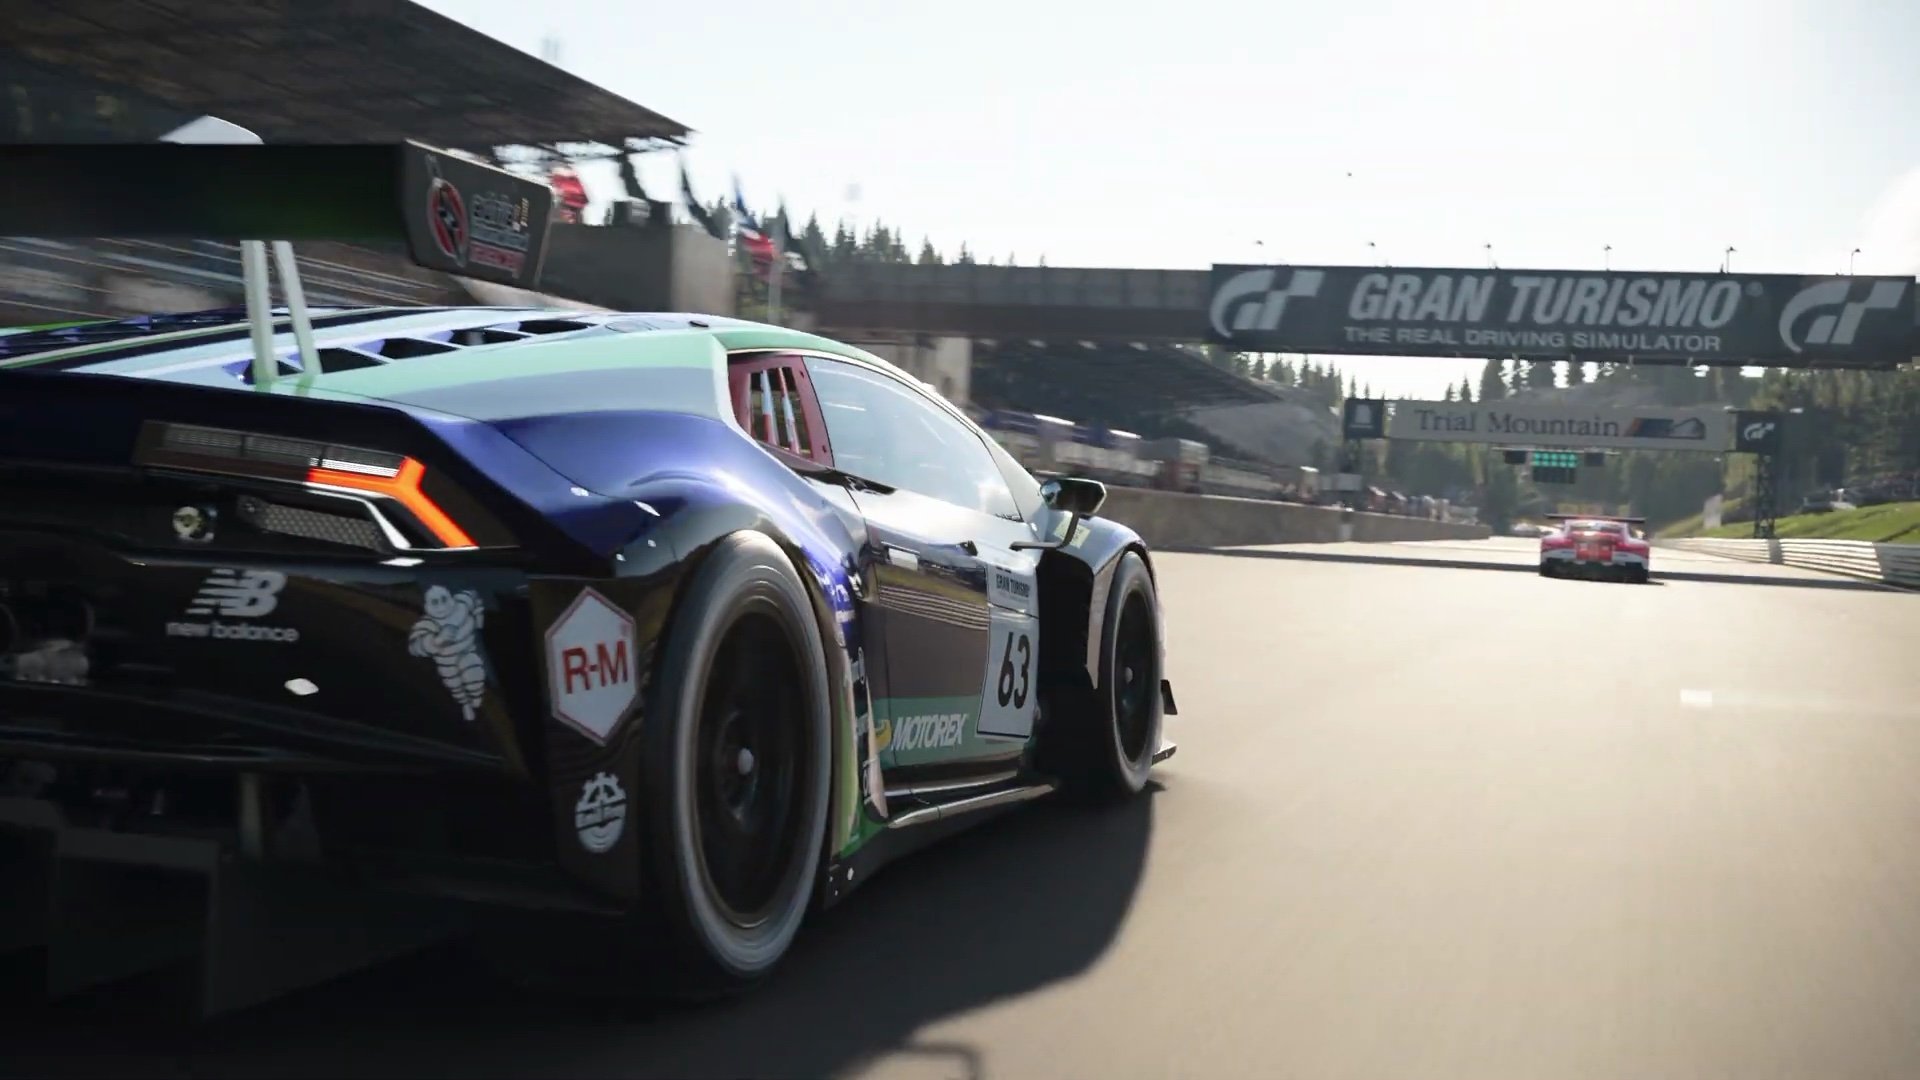 New Gran Turismo 7 Trailer Revealed a Whole Load of New Cars – GTPlanet